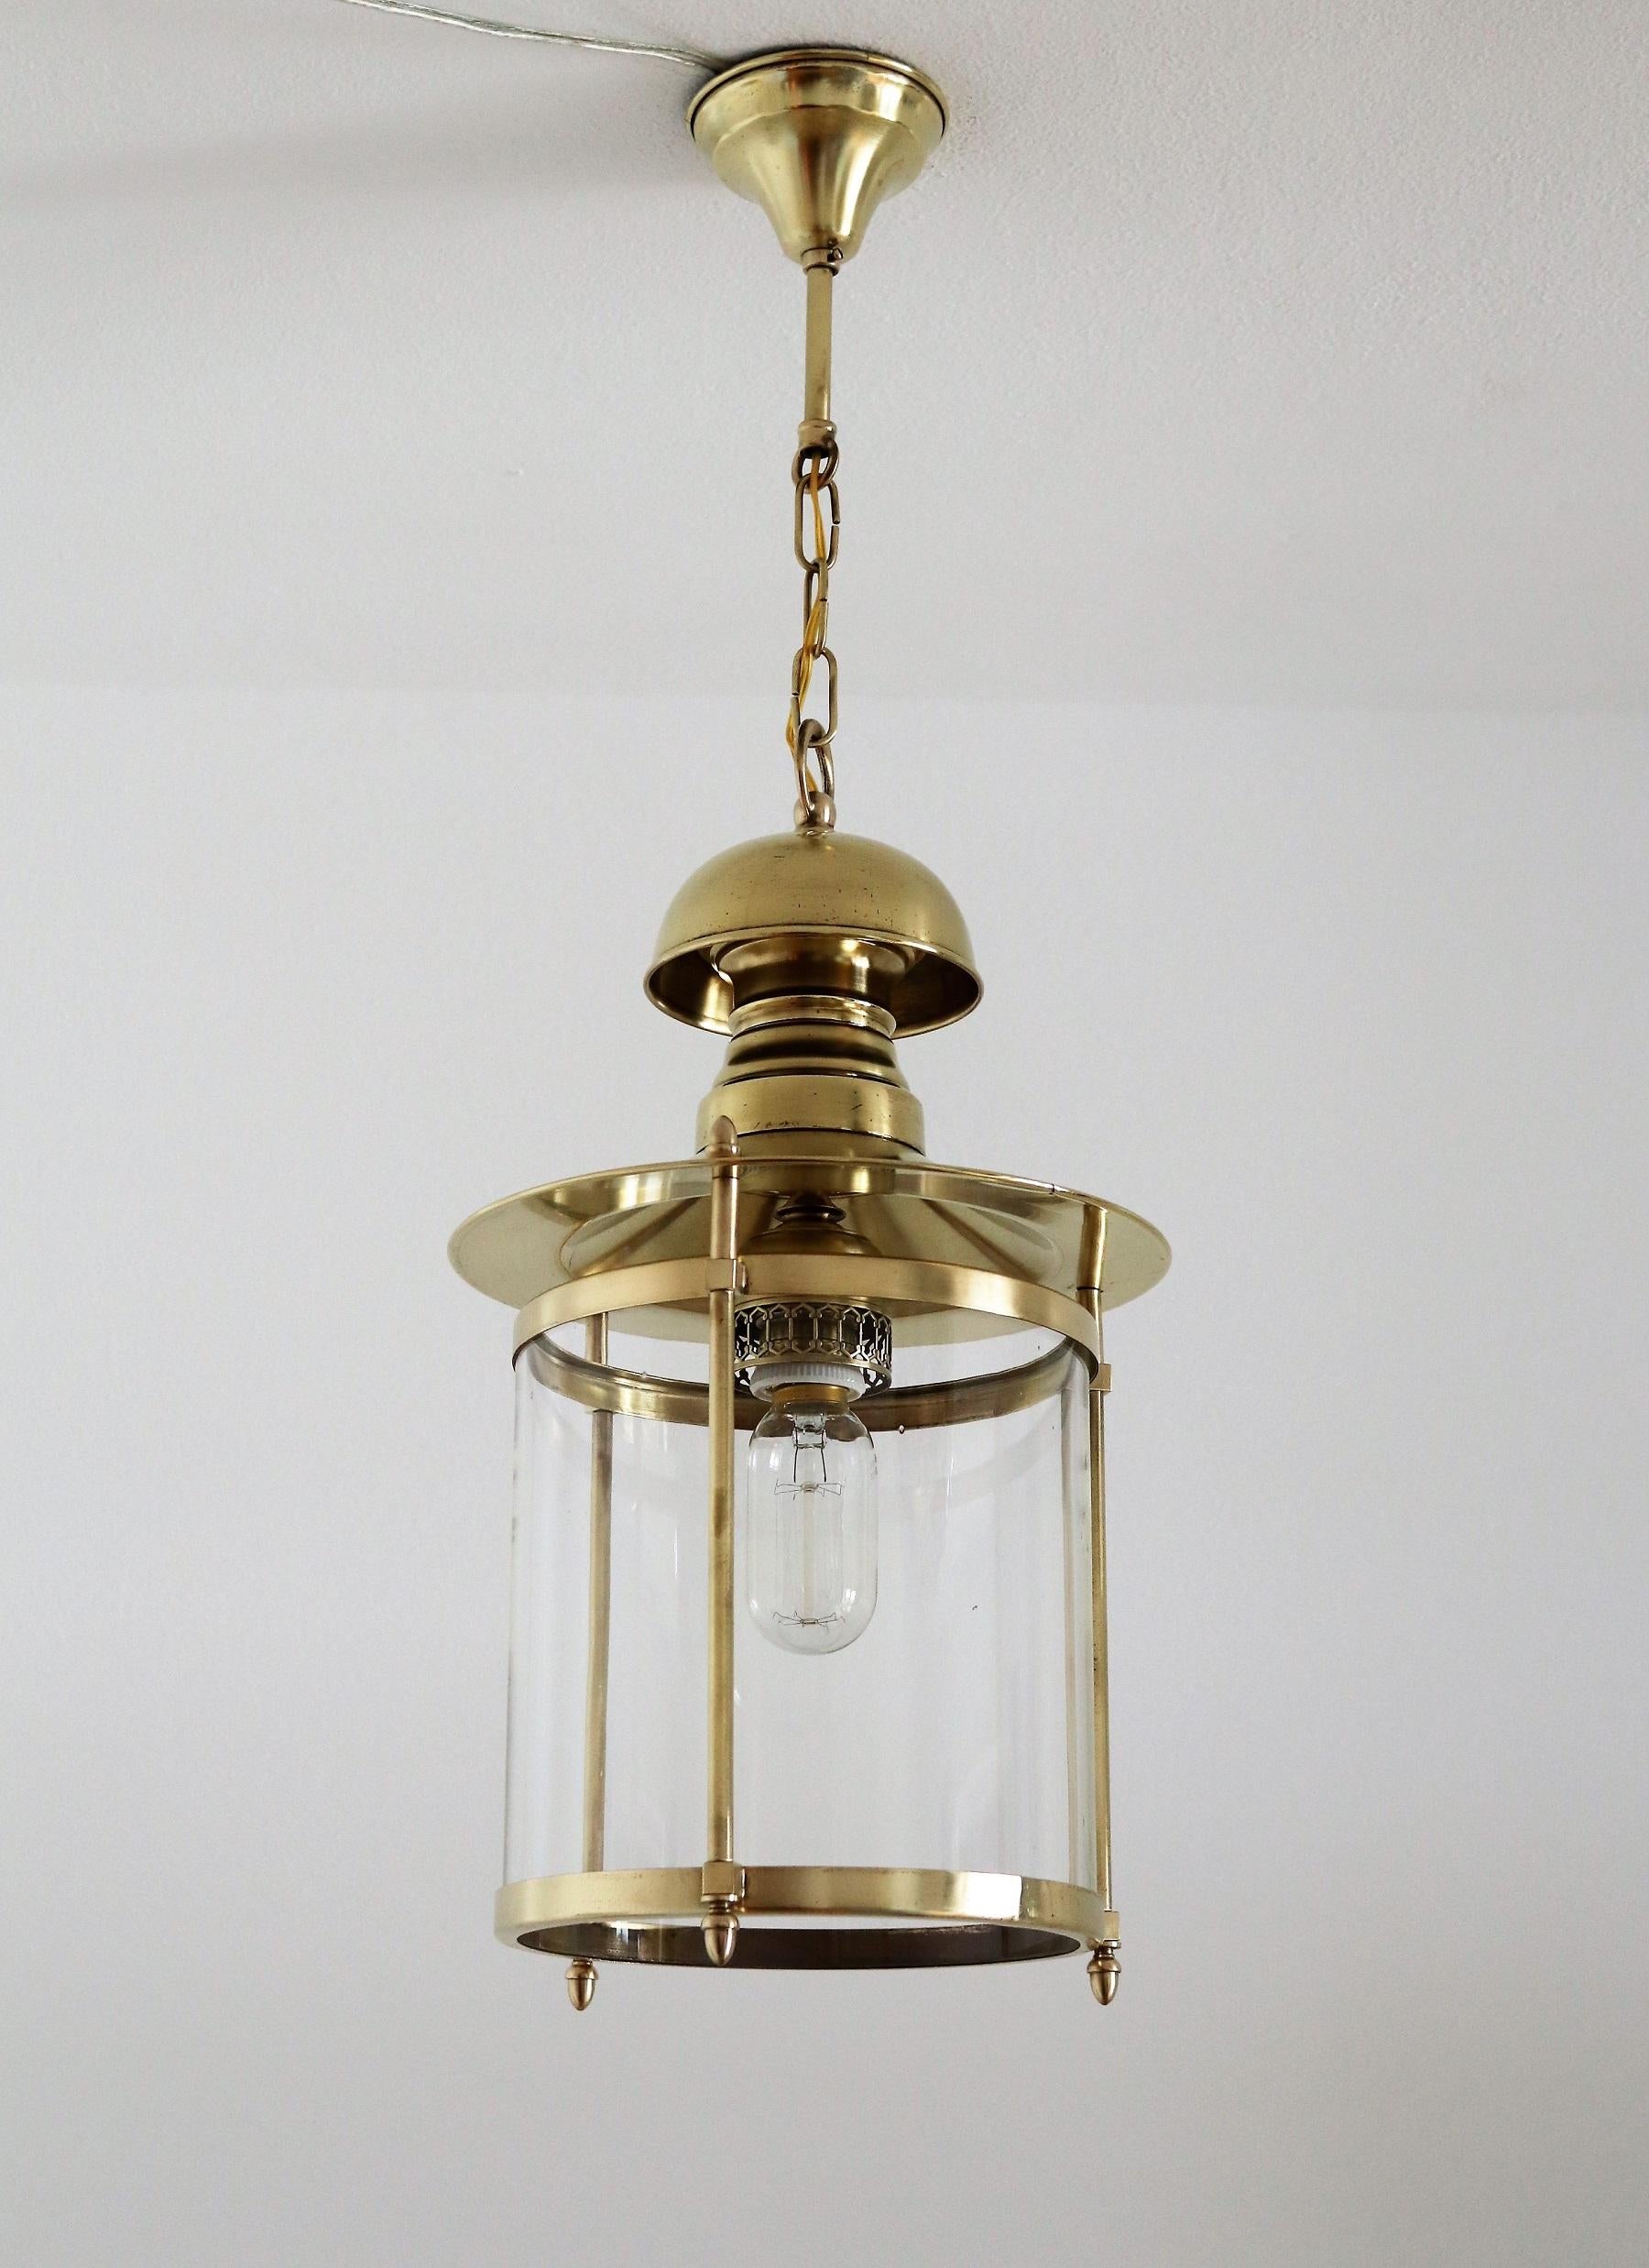 Italian Midcentury Brass and Glass Pendant Lamp or Lantern, 1970s For Sale 5